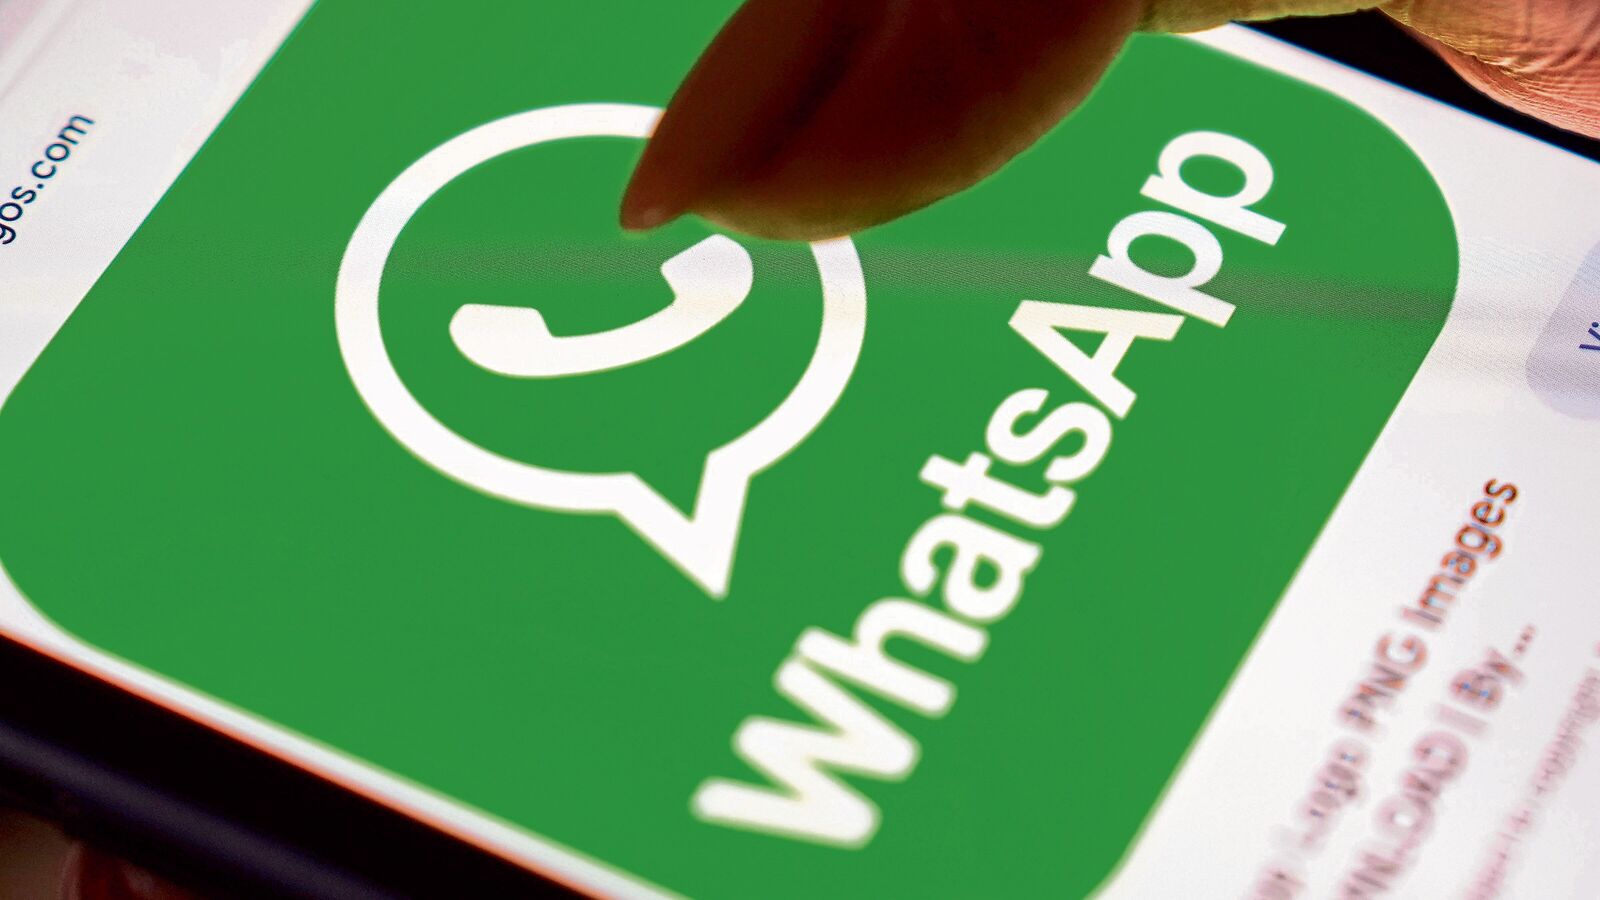 WhatsApp rolls out Protect IP address in calls feature: How to enable it